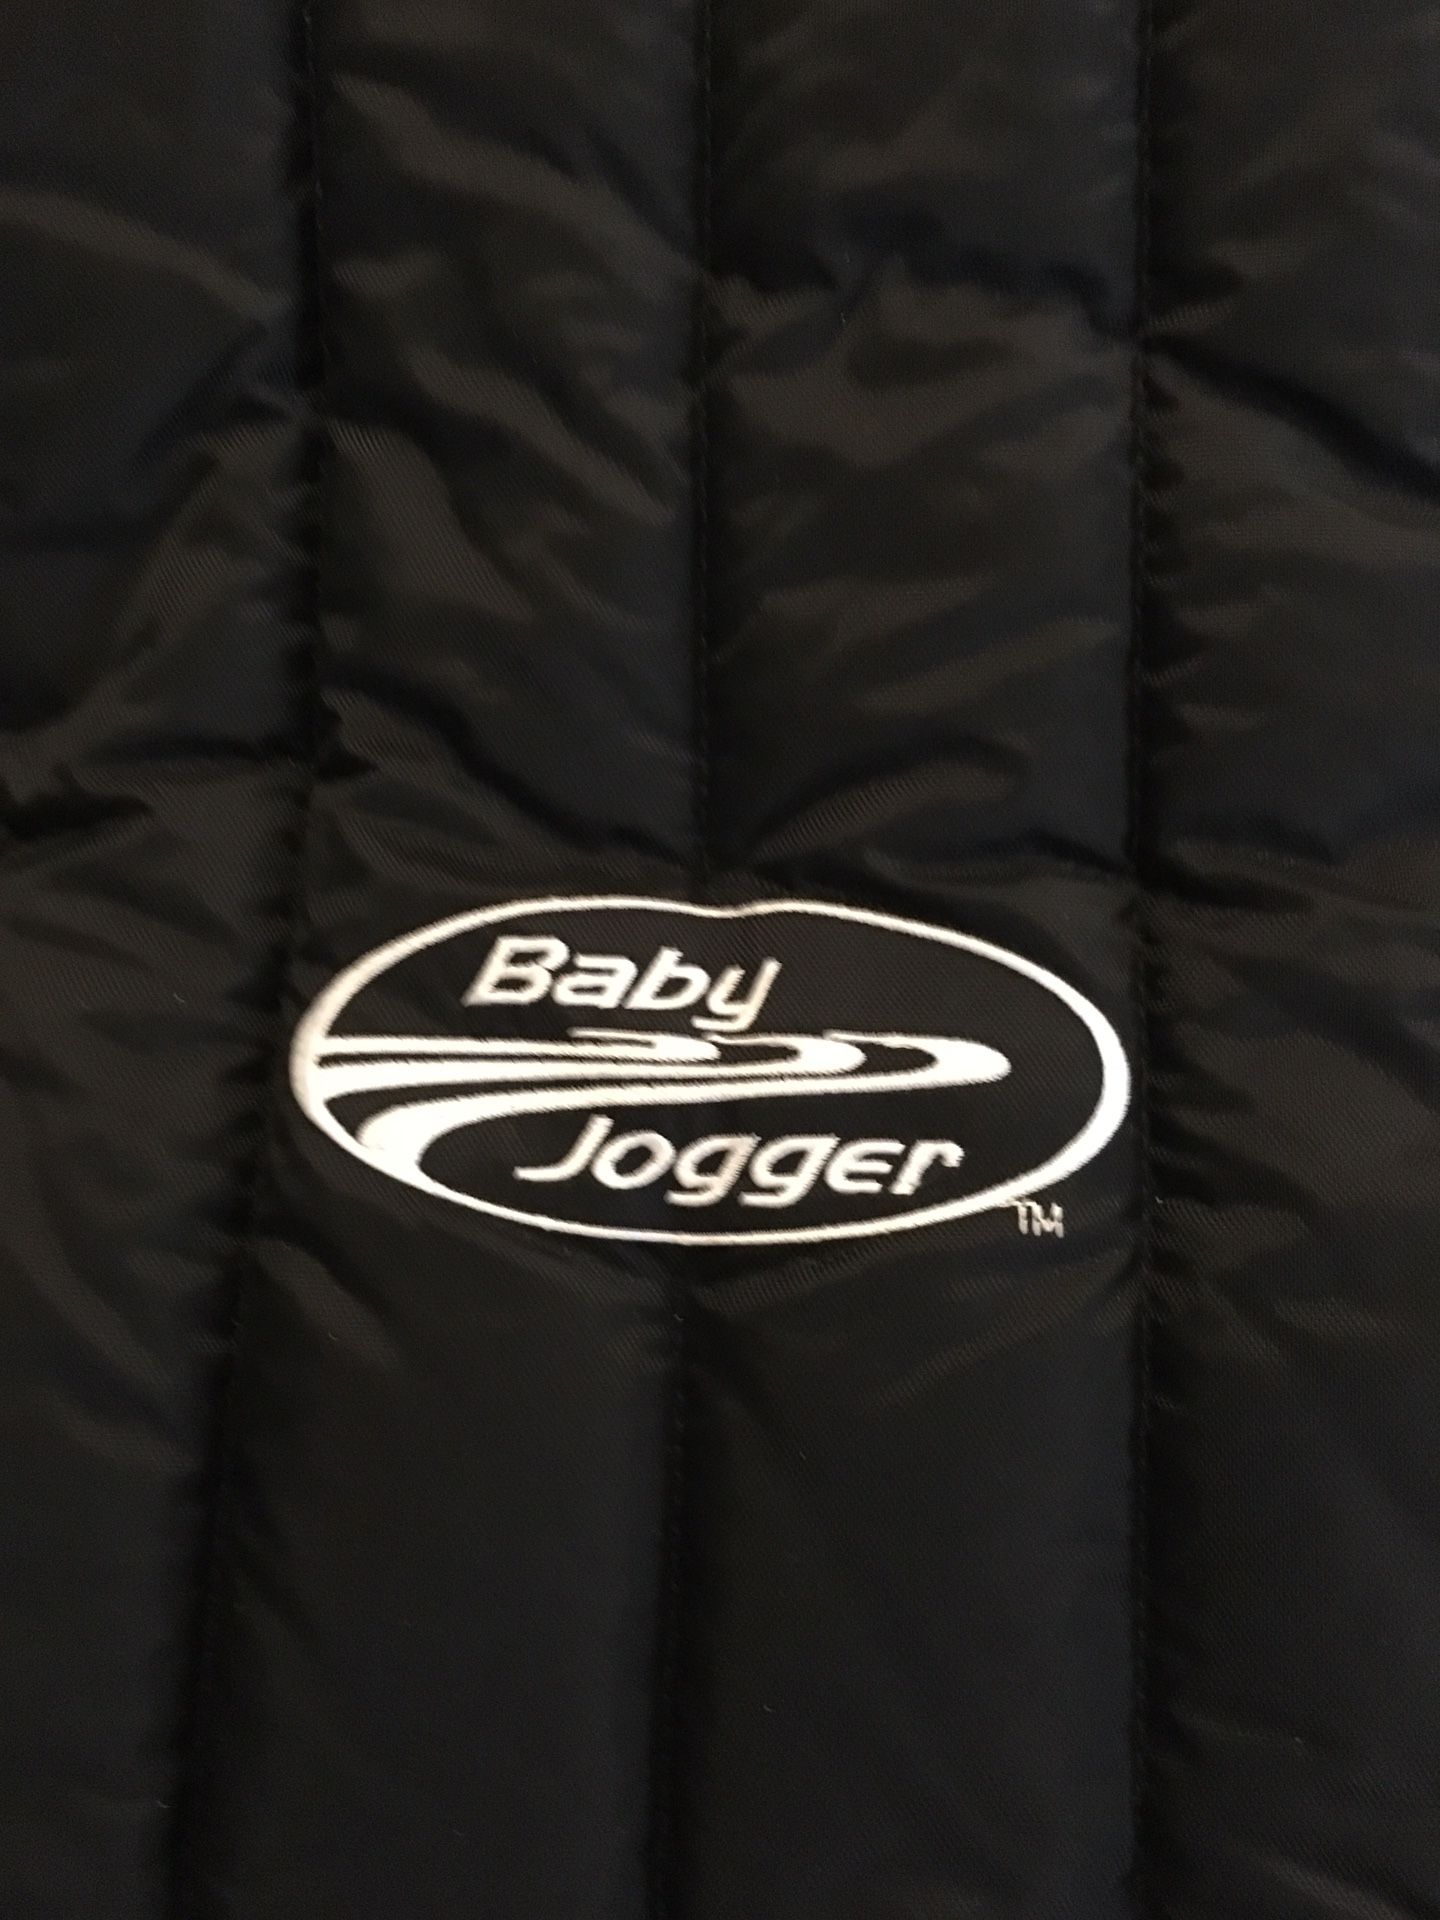 Cover for stroller , universal .offer available